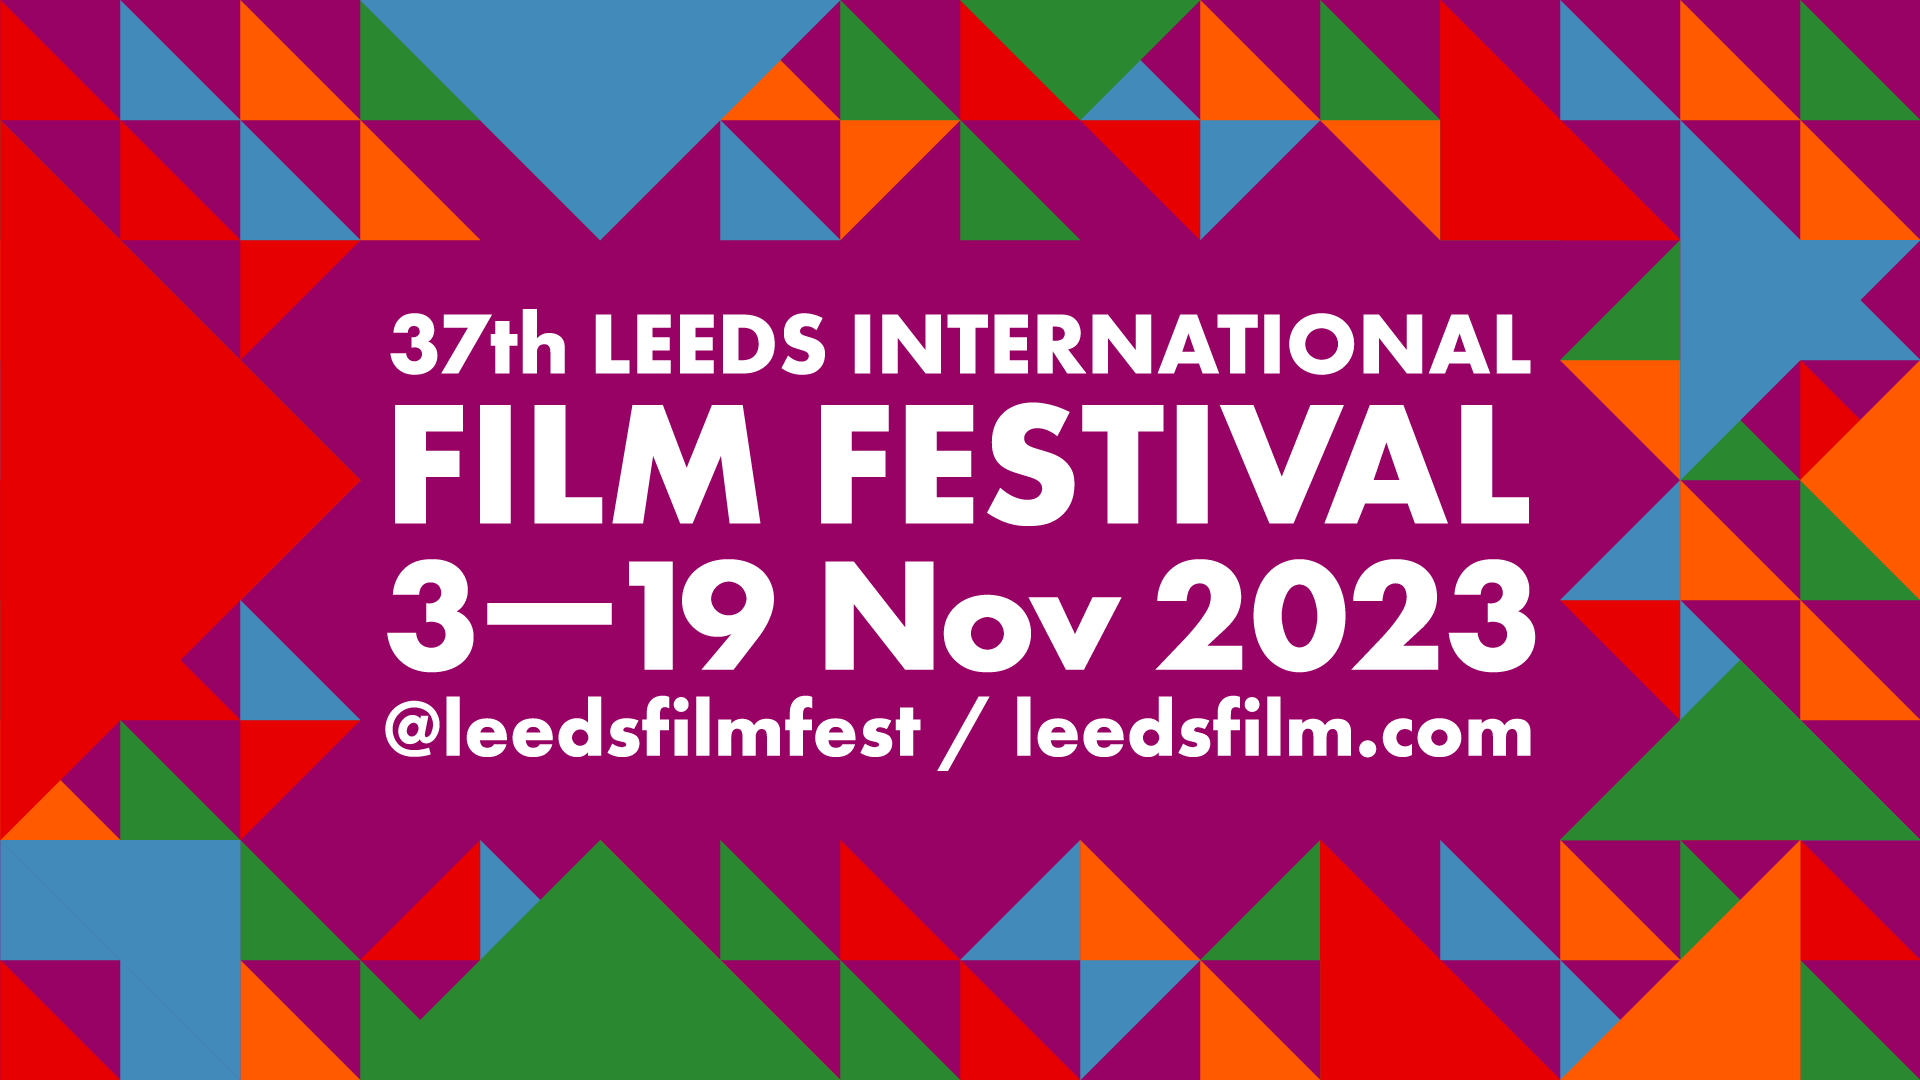 Lots of coloured triangles on a purple background, in the middle text says "37th Leeds International Film Festival, 3-19 Nov 2023. @leedsfilmfest /leedsfilm.com"